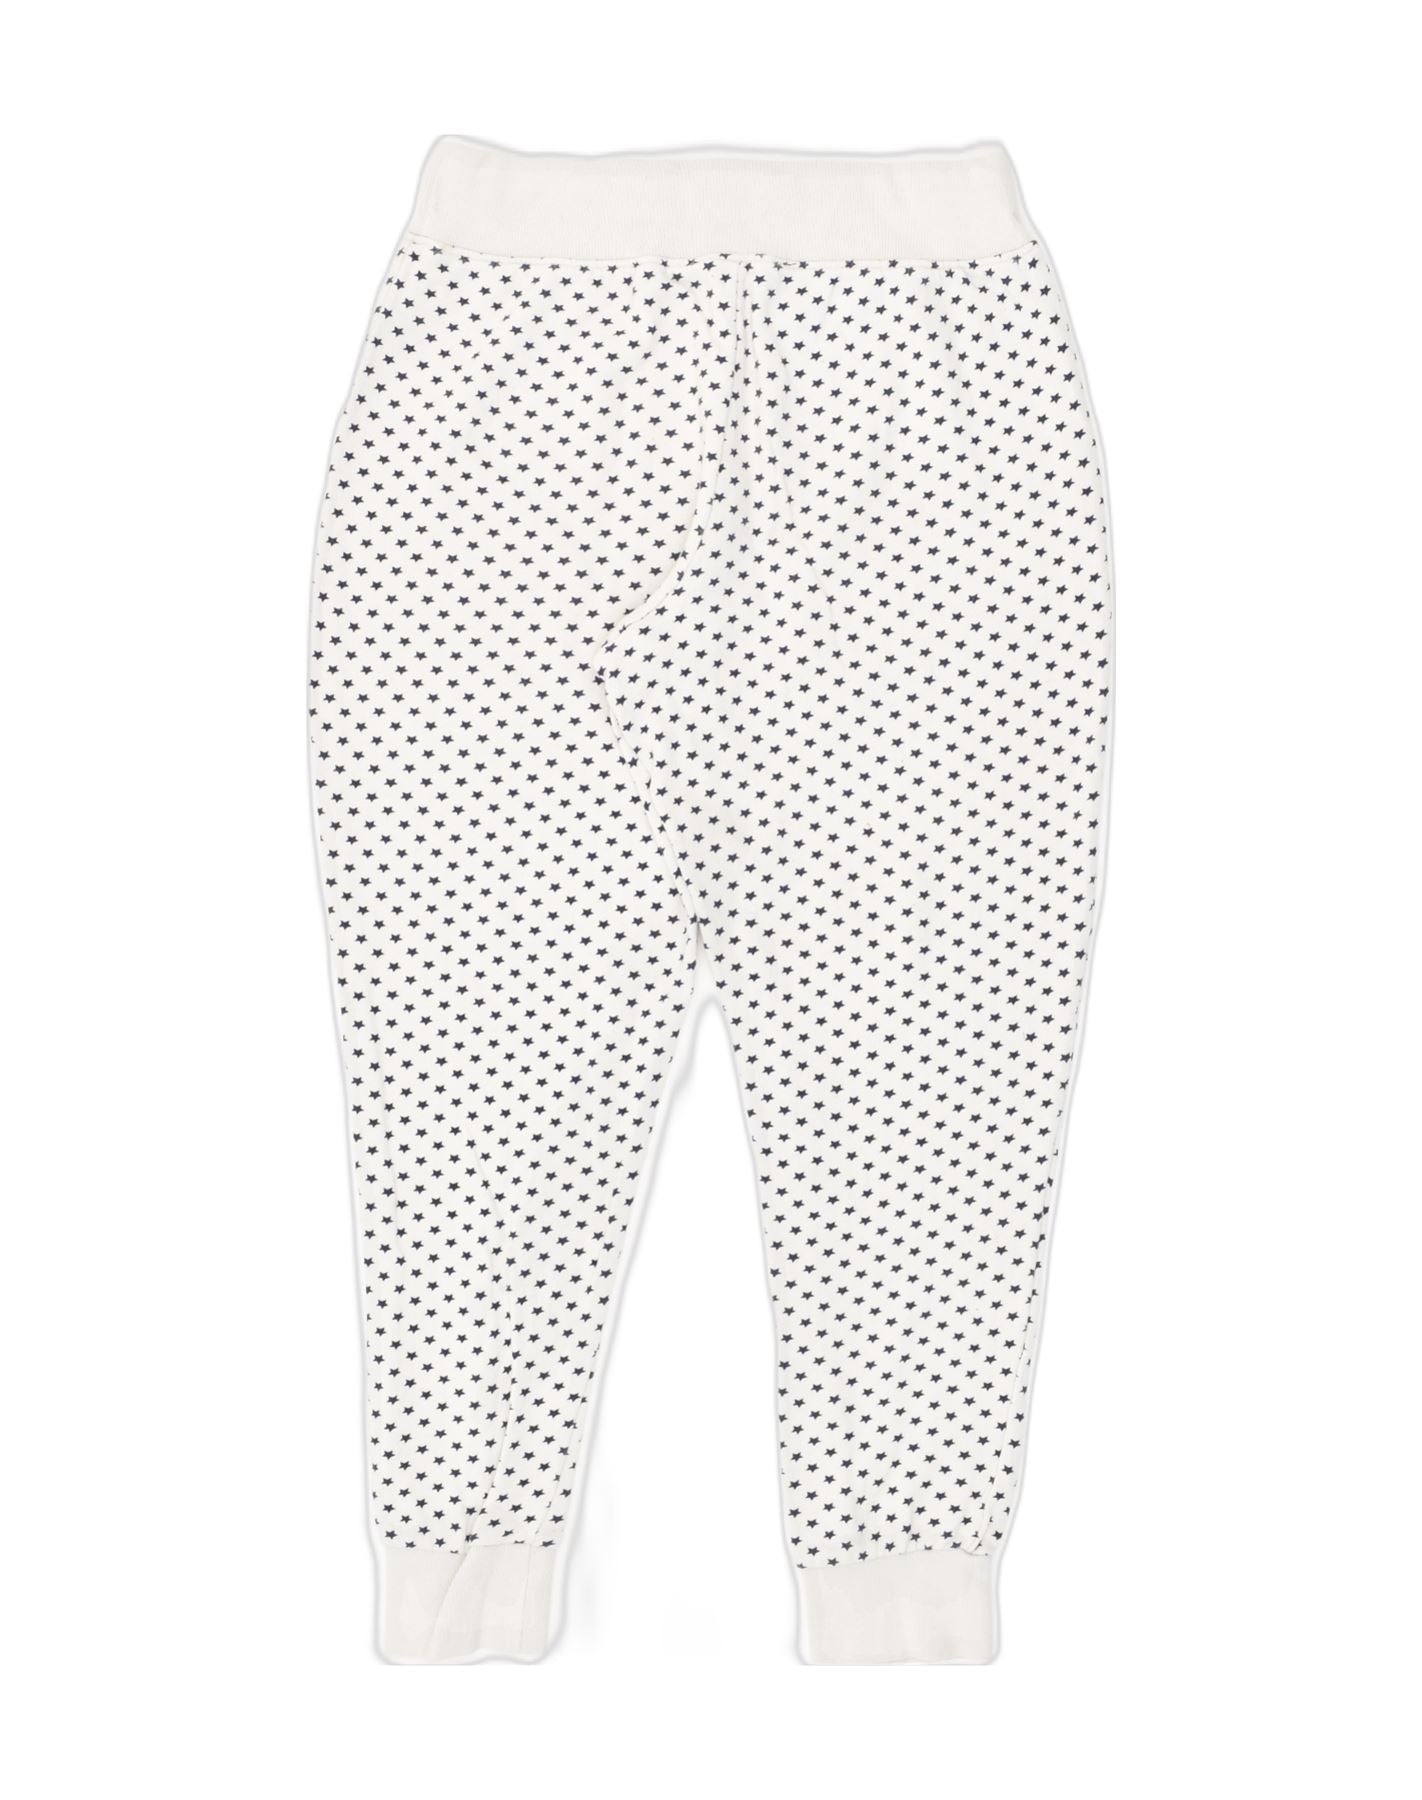 Women's Crew Jogger from Crew Clothing Company